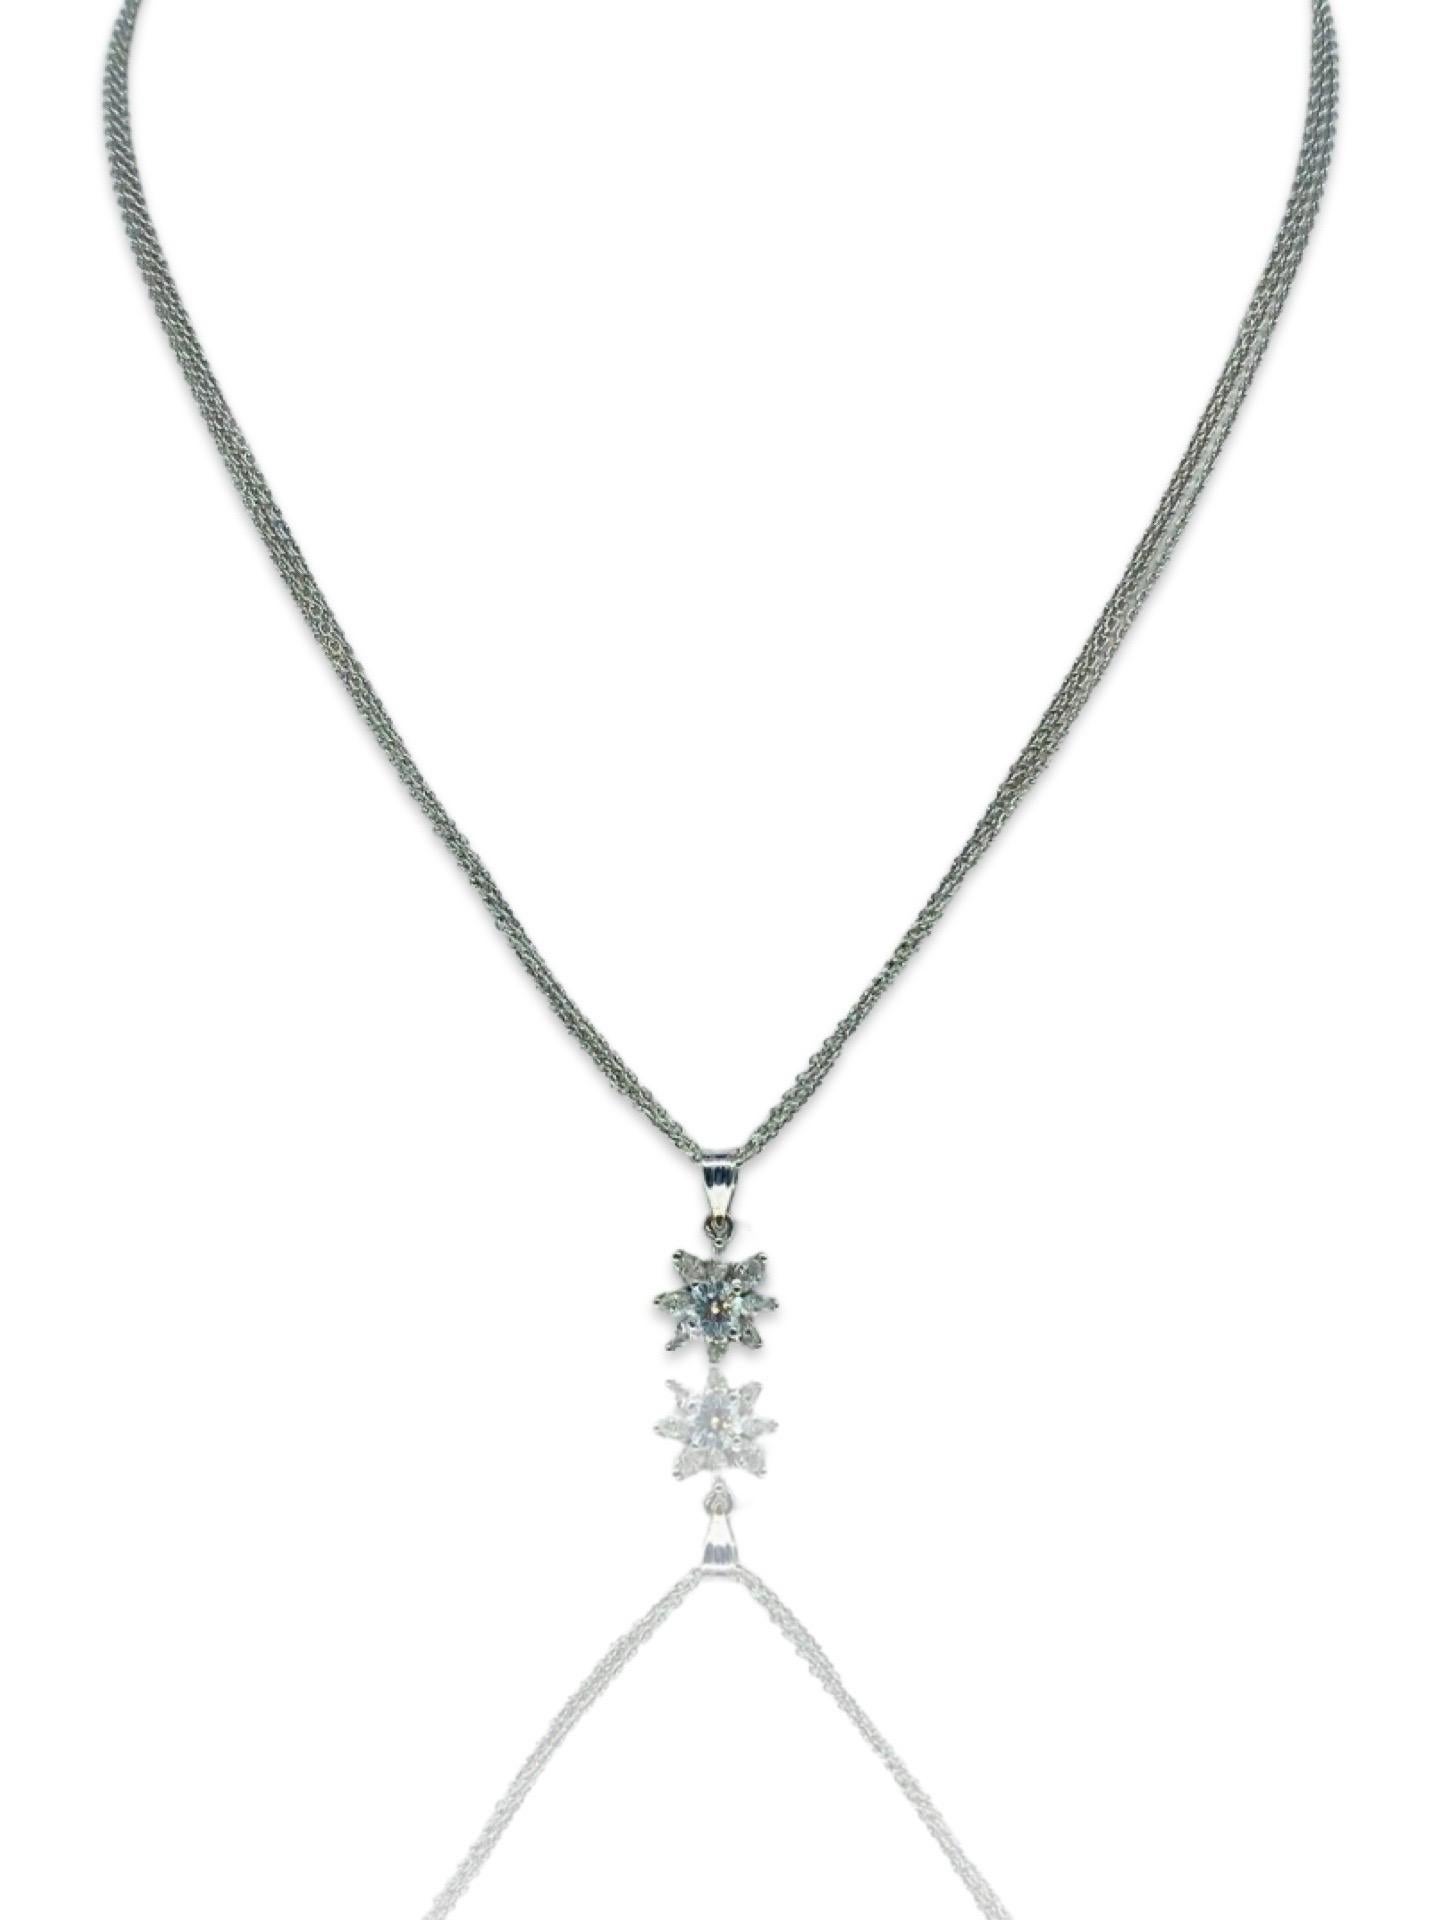 Vintage 0.75 Carat Diamonds Marquise Leaf Floral Pendant Necklace 18k White Gold. The center round brilliant cut Diamond weights 0.25 carat H/VS with the additional surrounding marquise cut diamonds weighting approx 0.50tcw J/SI for a total of 0.75